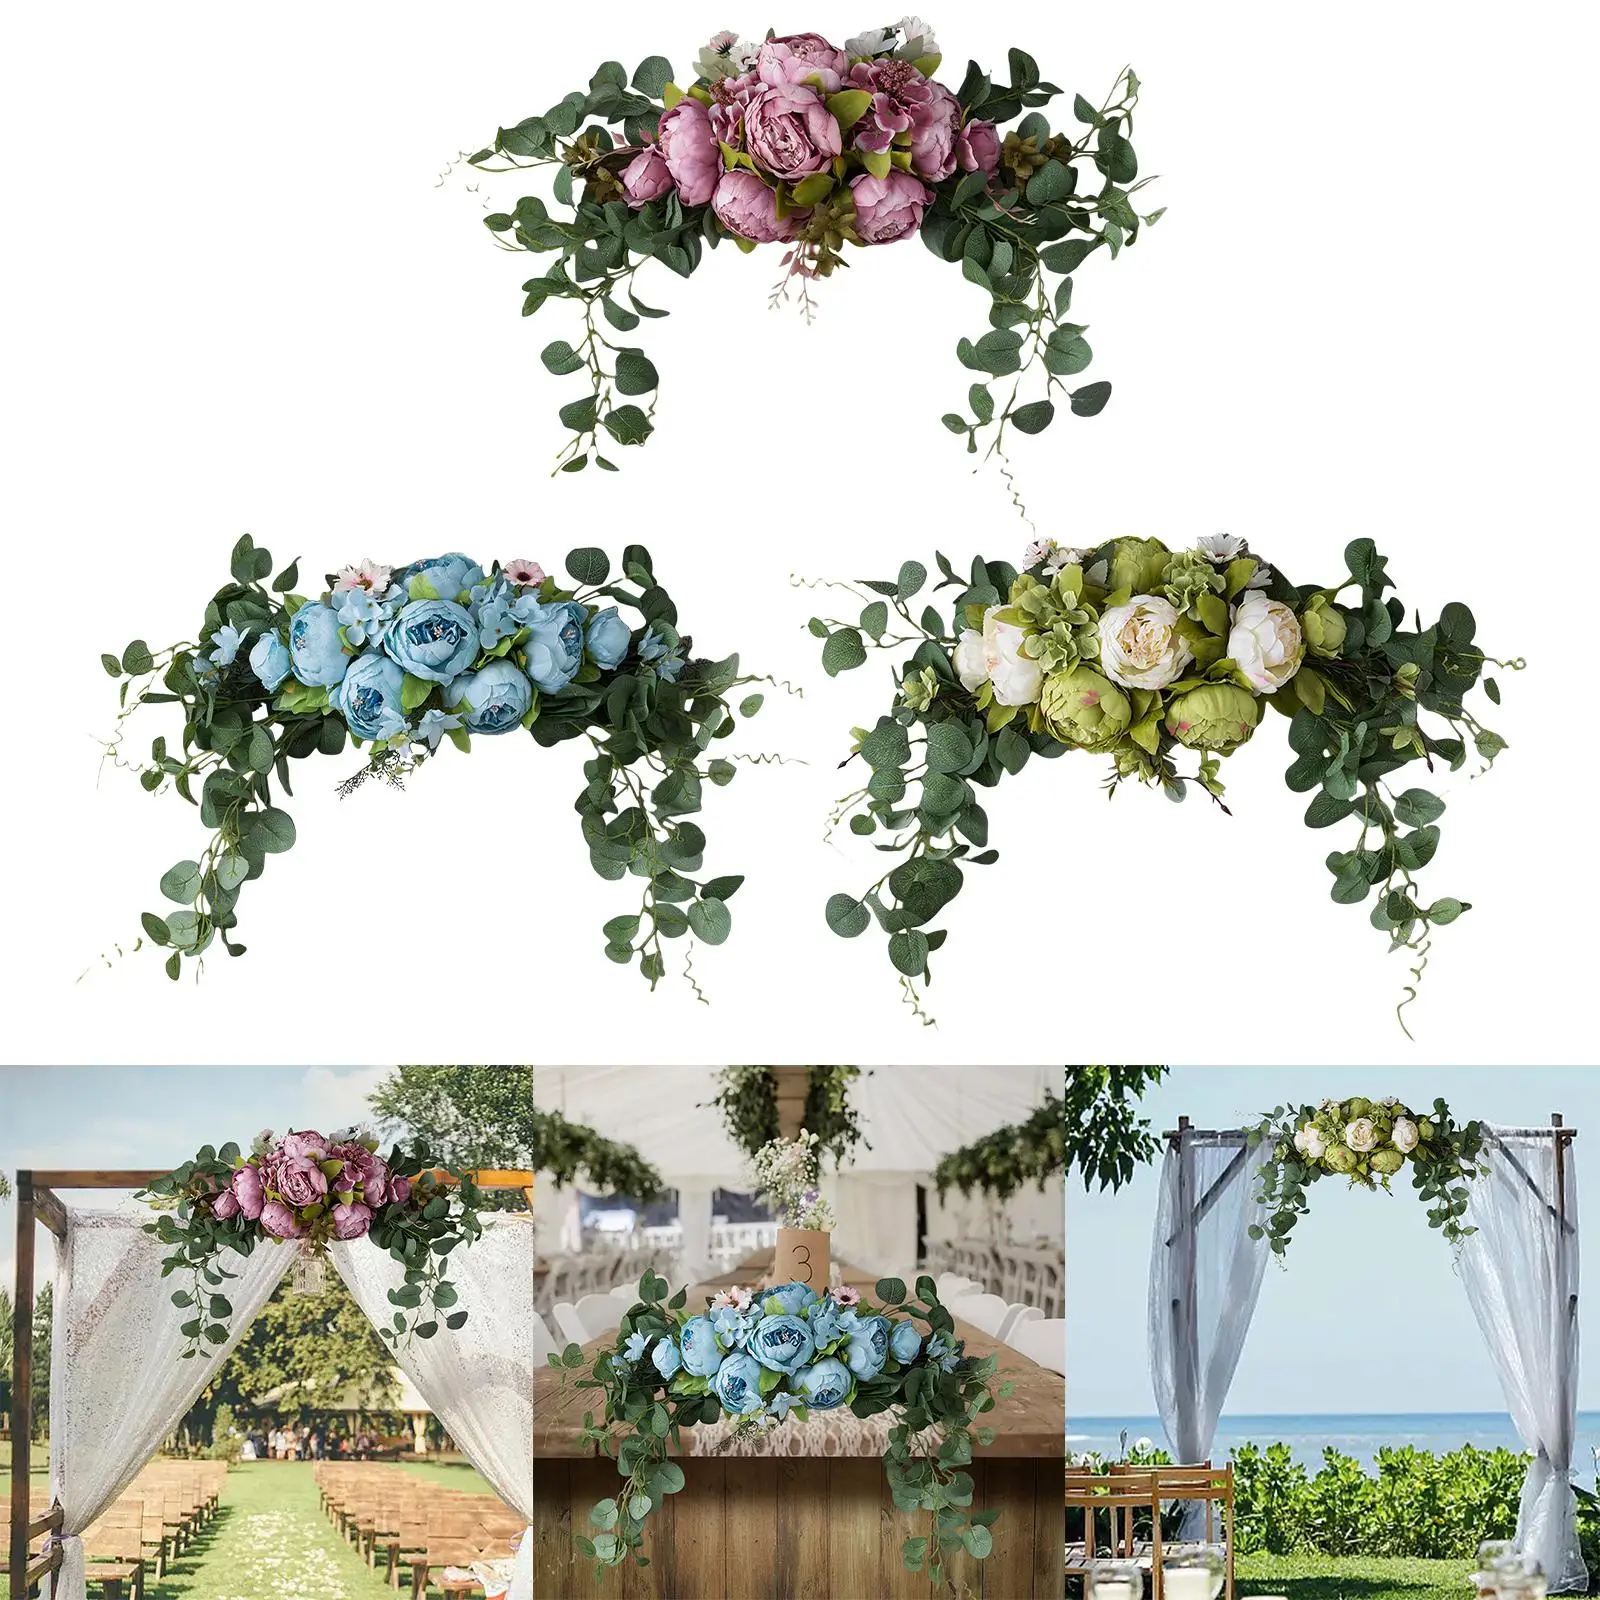  Swag Home Hanging Wreath  Arch  Decorative Photography Props